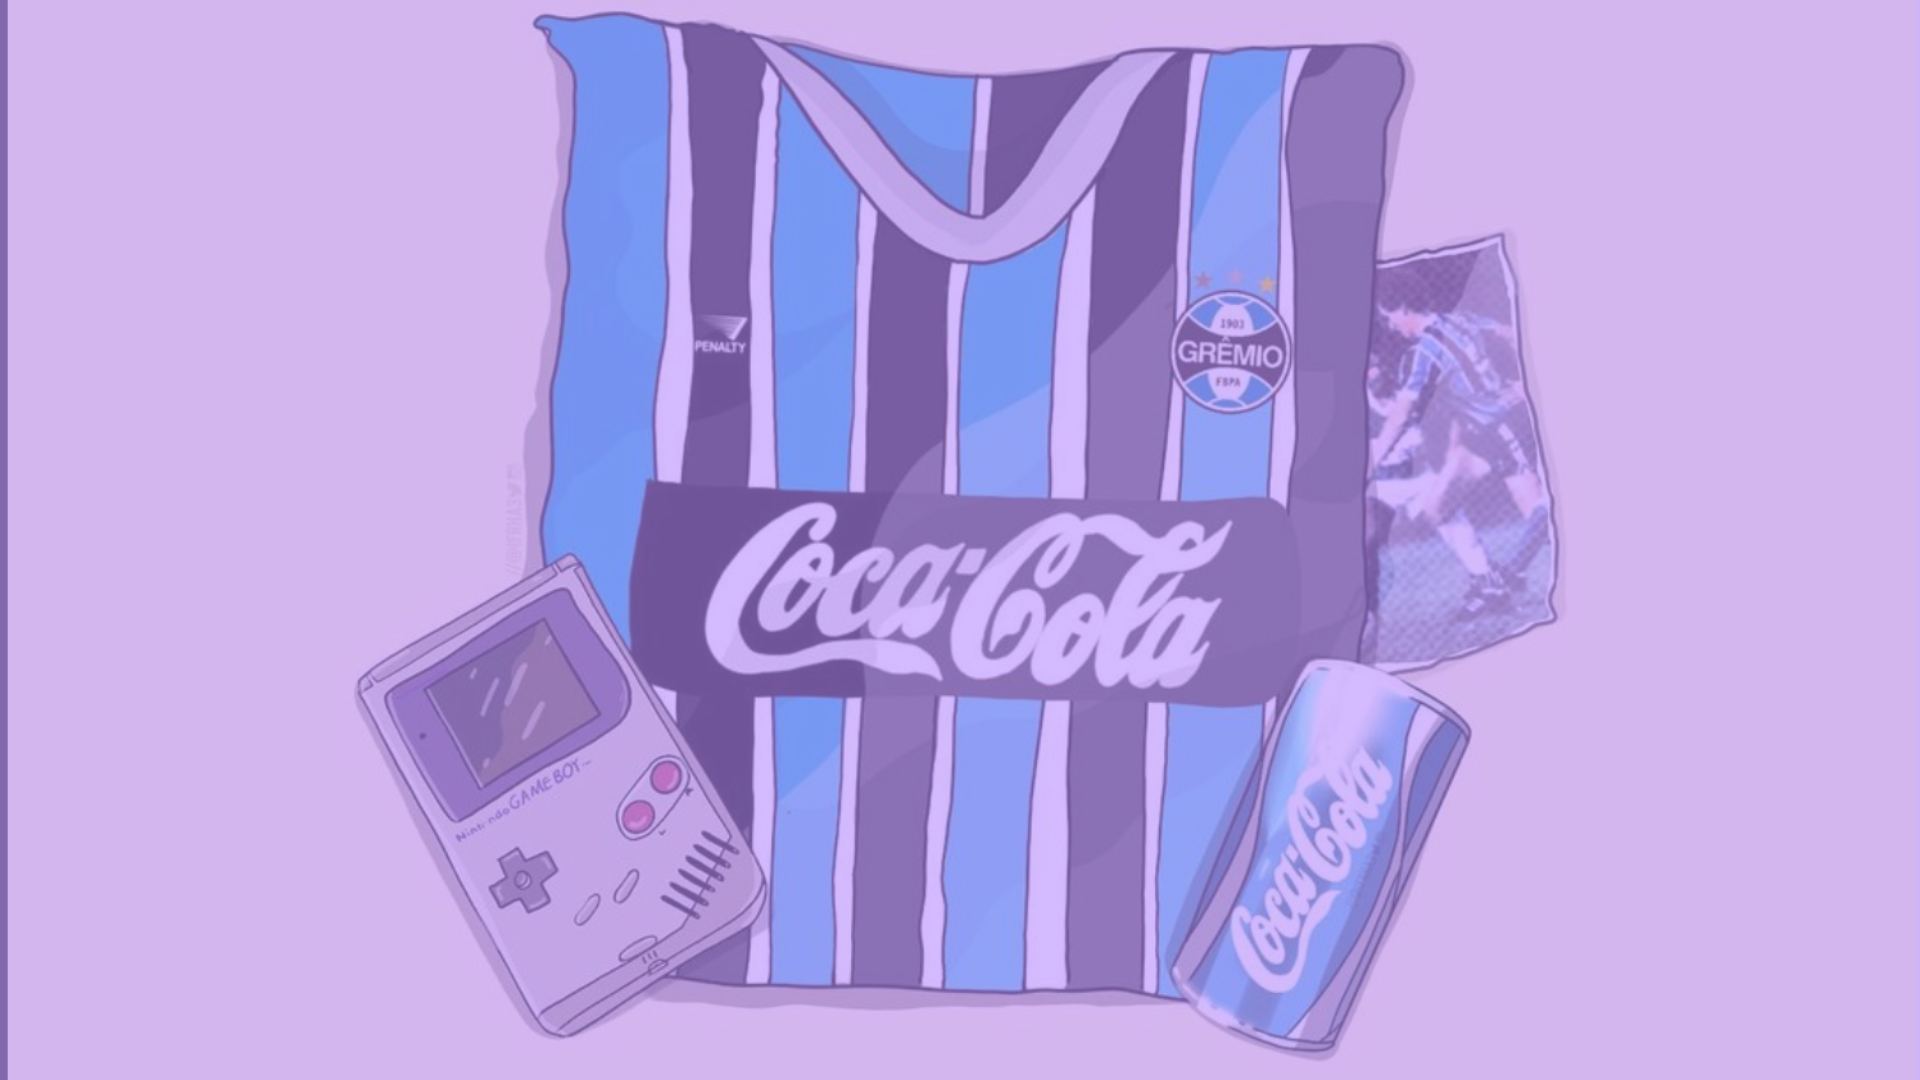 Ifrha: The designer reminding us why we love the Coca-Cola Gremio shirts